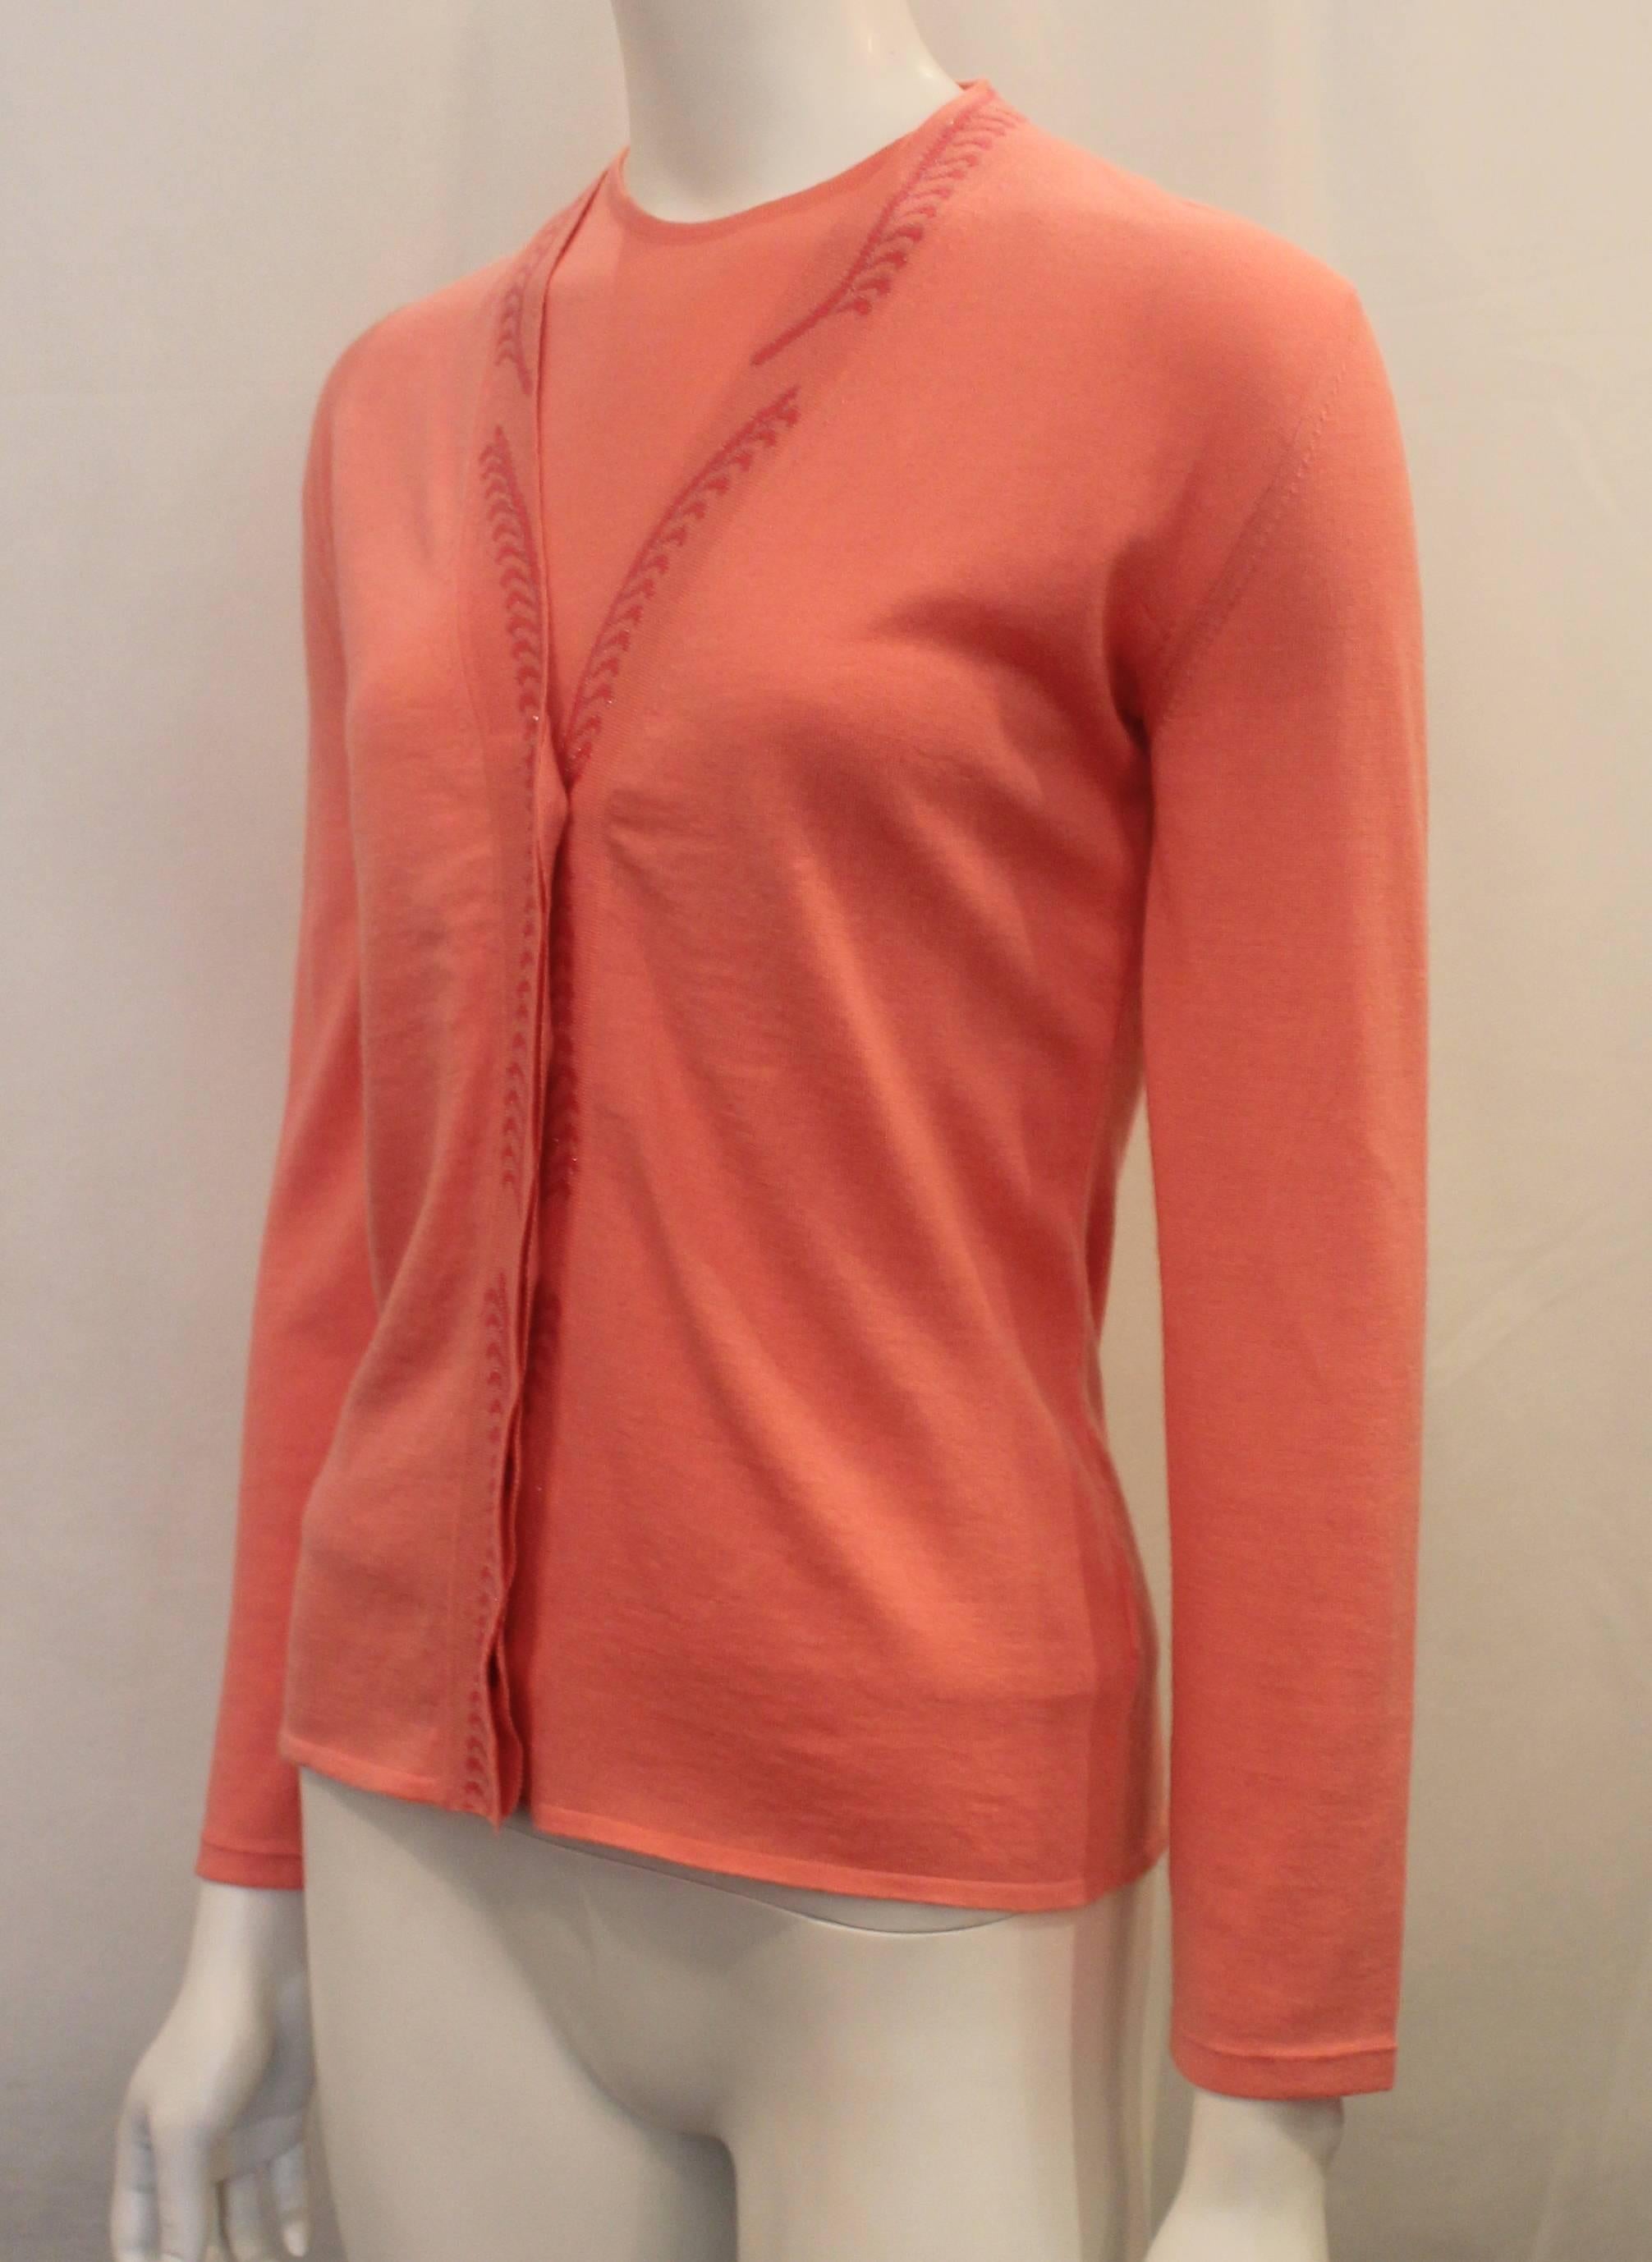 Emilio Pucci Coral Cashmere Blend Sweater Set - XS - 1990's. This beautiful set is a cashmere-cotton blend. The top is sleeveless and has a round neckline. The cardigan has buttons and a trim of dark pink and silver in a vine design. Both pieces are